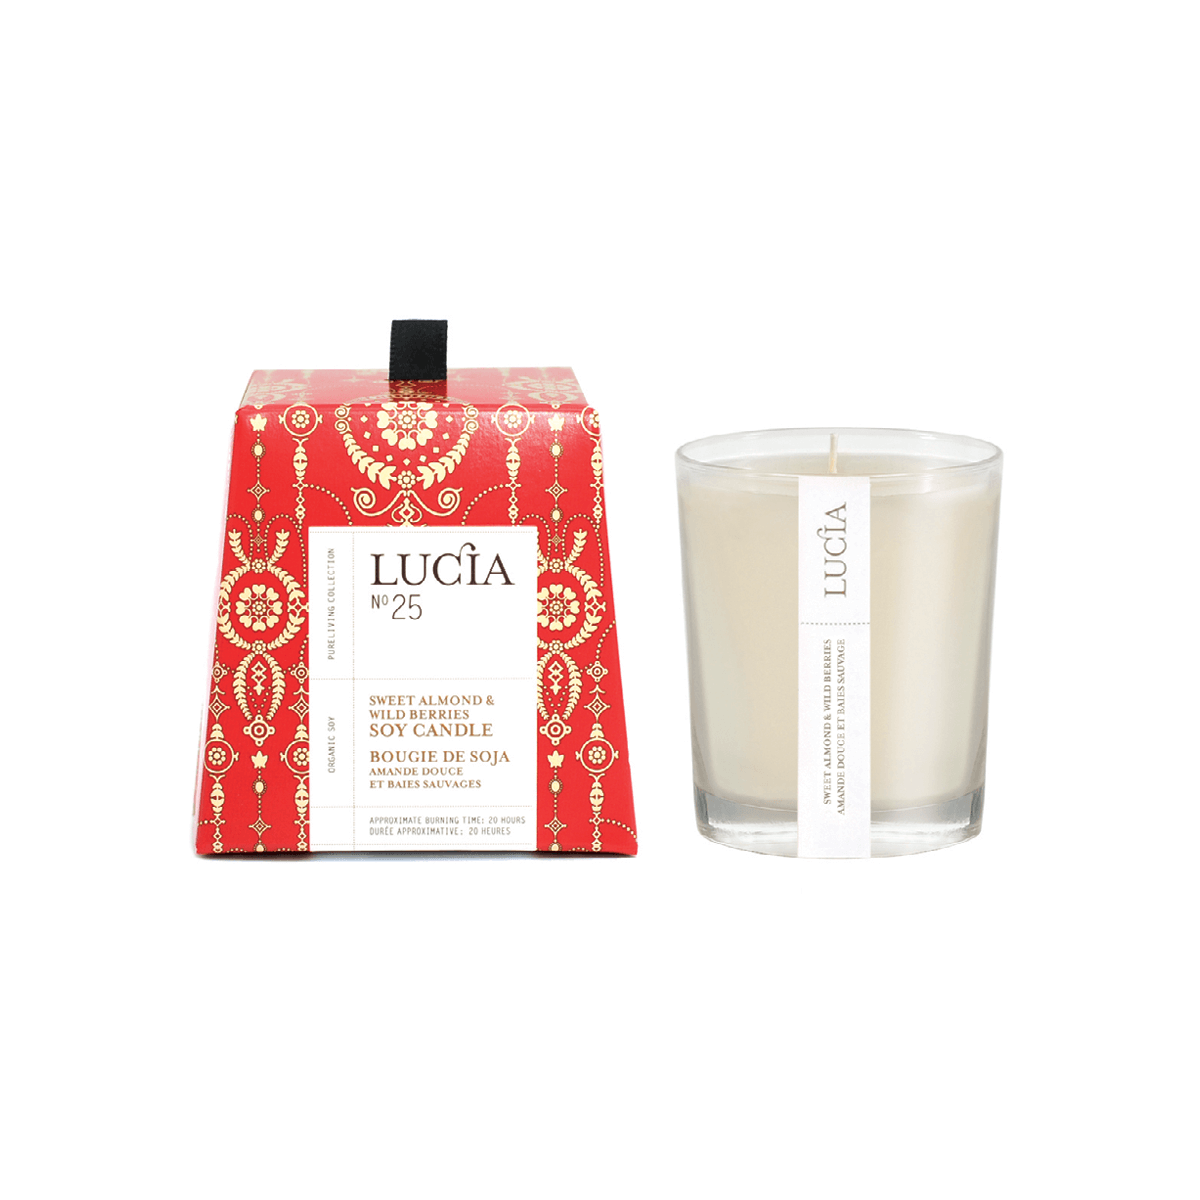 Lucia N°25 - Sweet Almond & Wild Berries Soy Candle